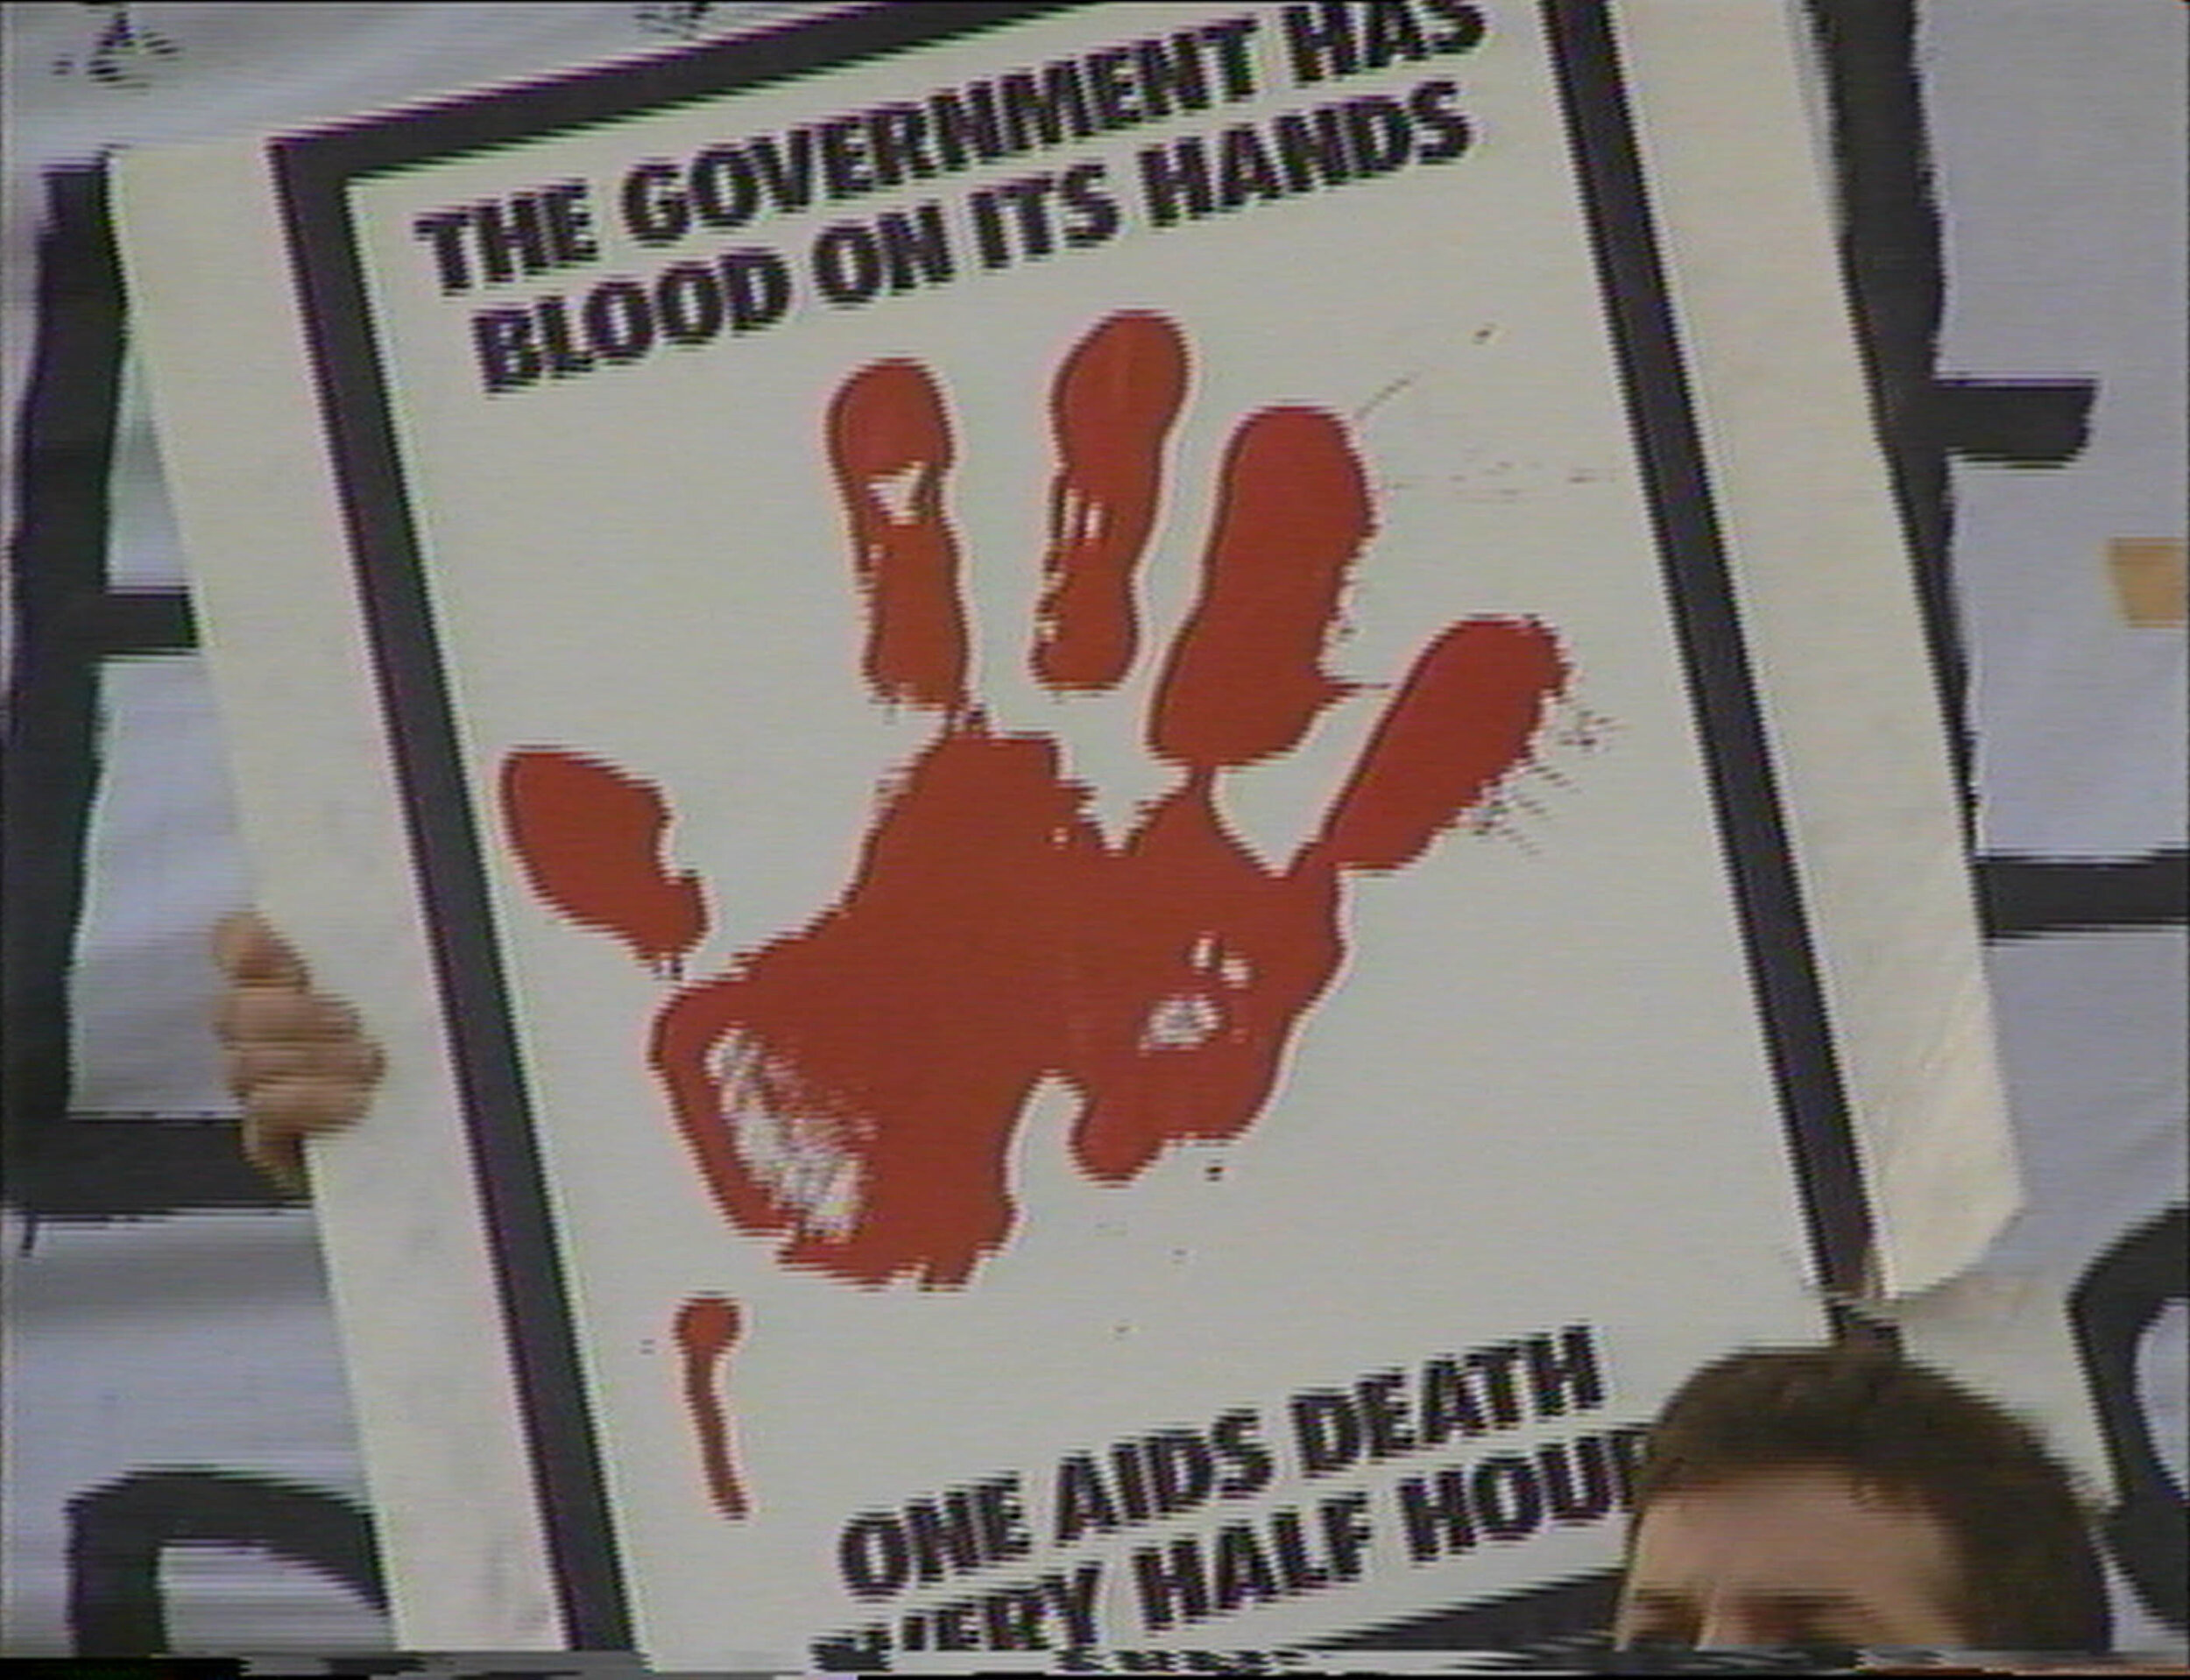 Sign held by ACT UP protester saying 'The government has blood on its hands--one death every half hour'